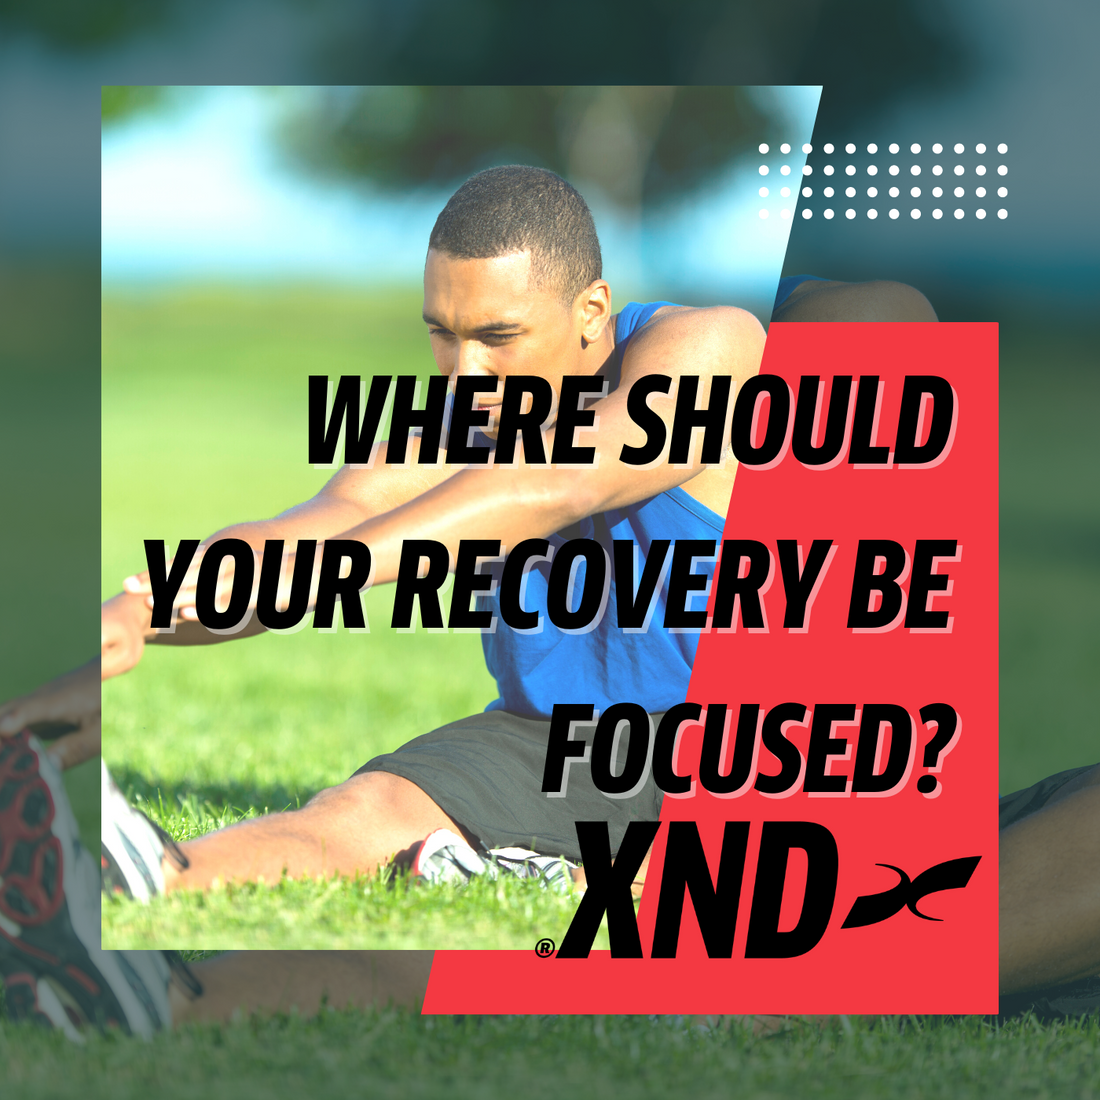 Where should your recovery focus be?